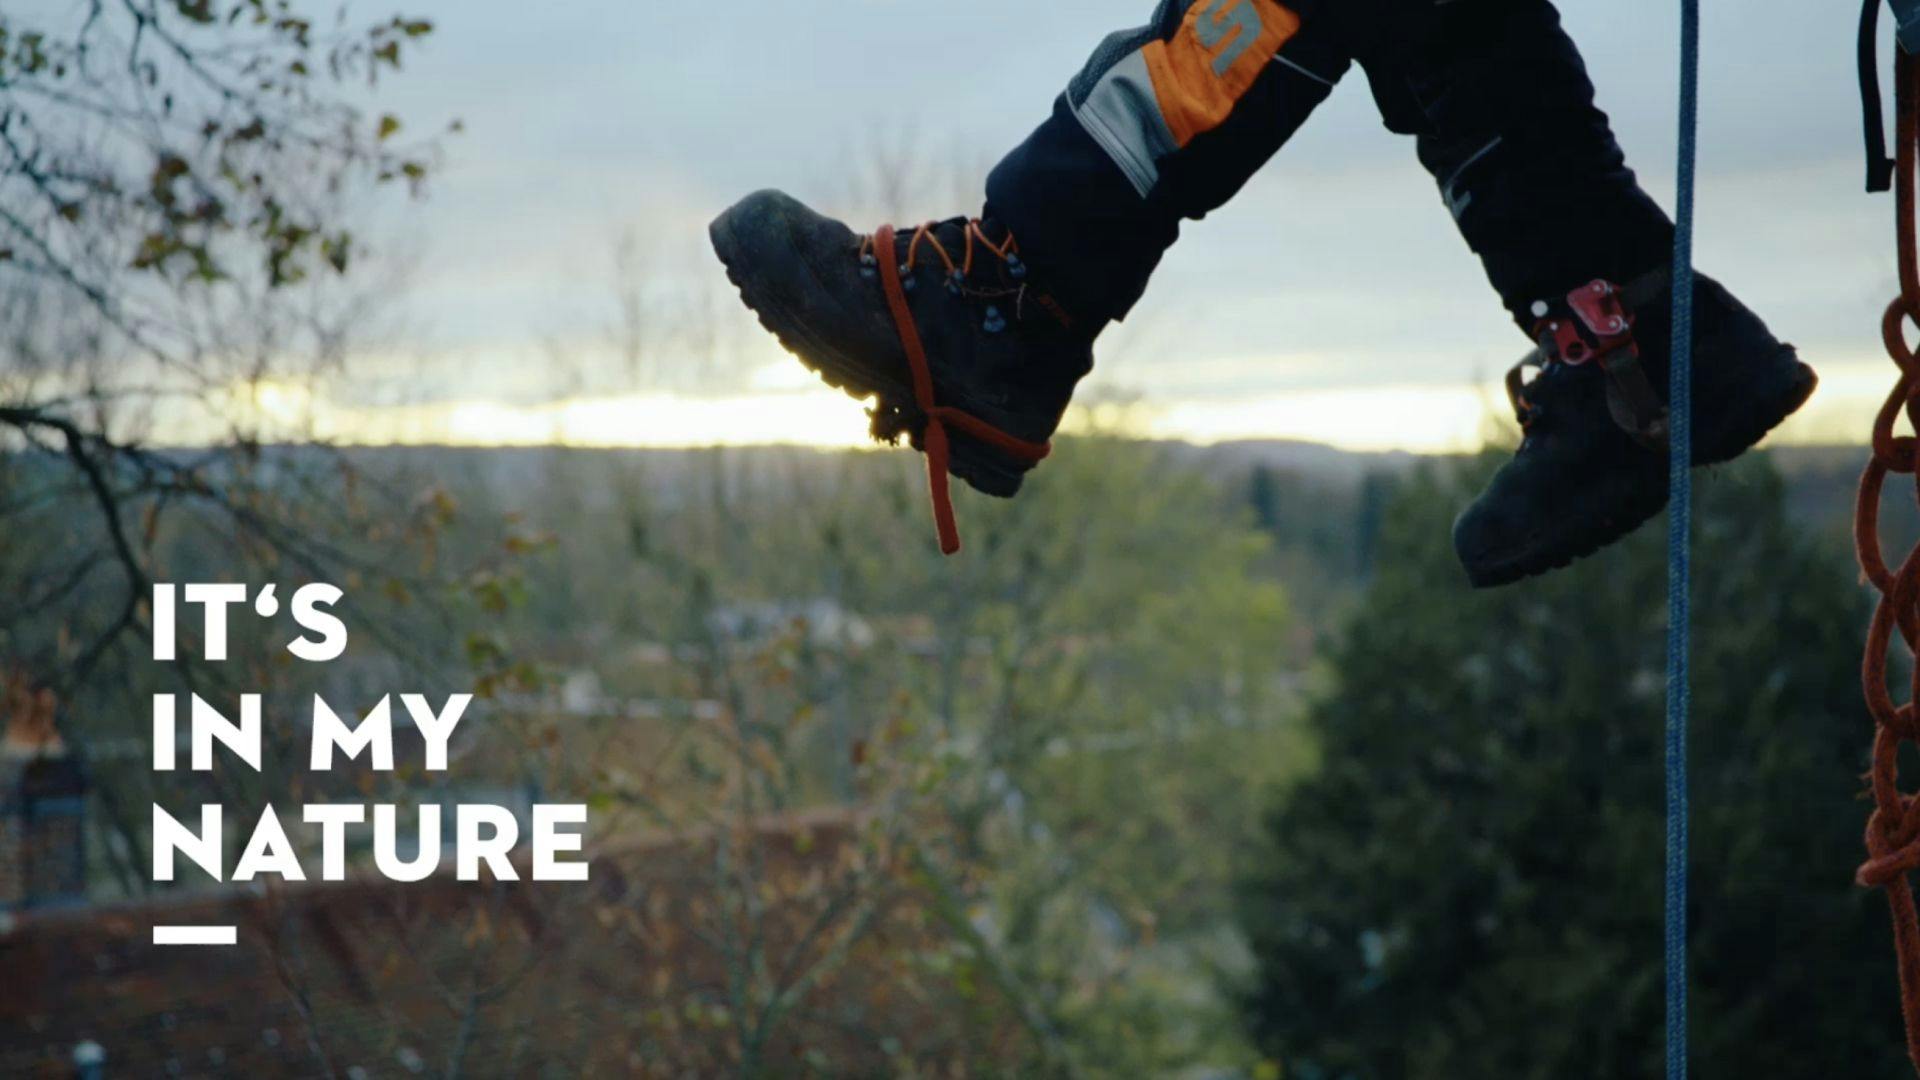 STIHL It's in my nature Campaign image